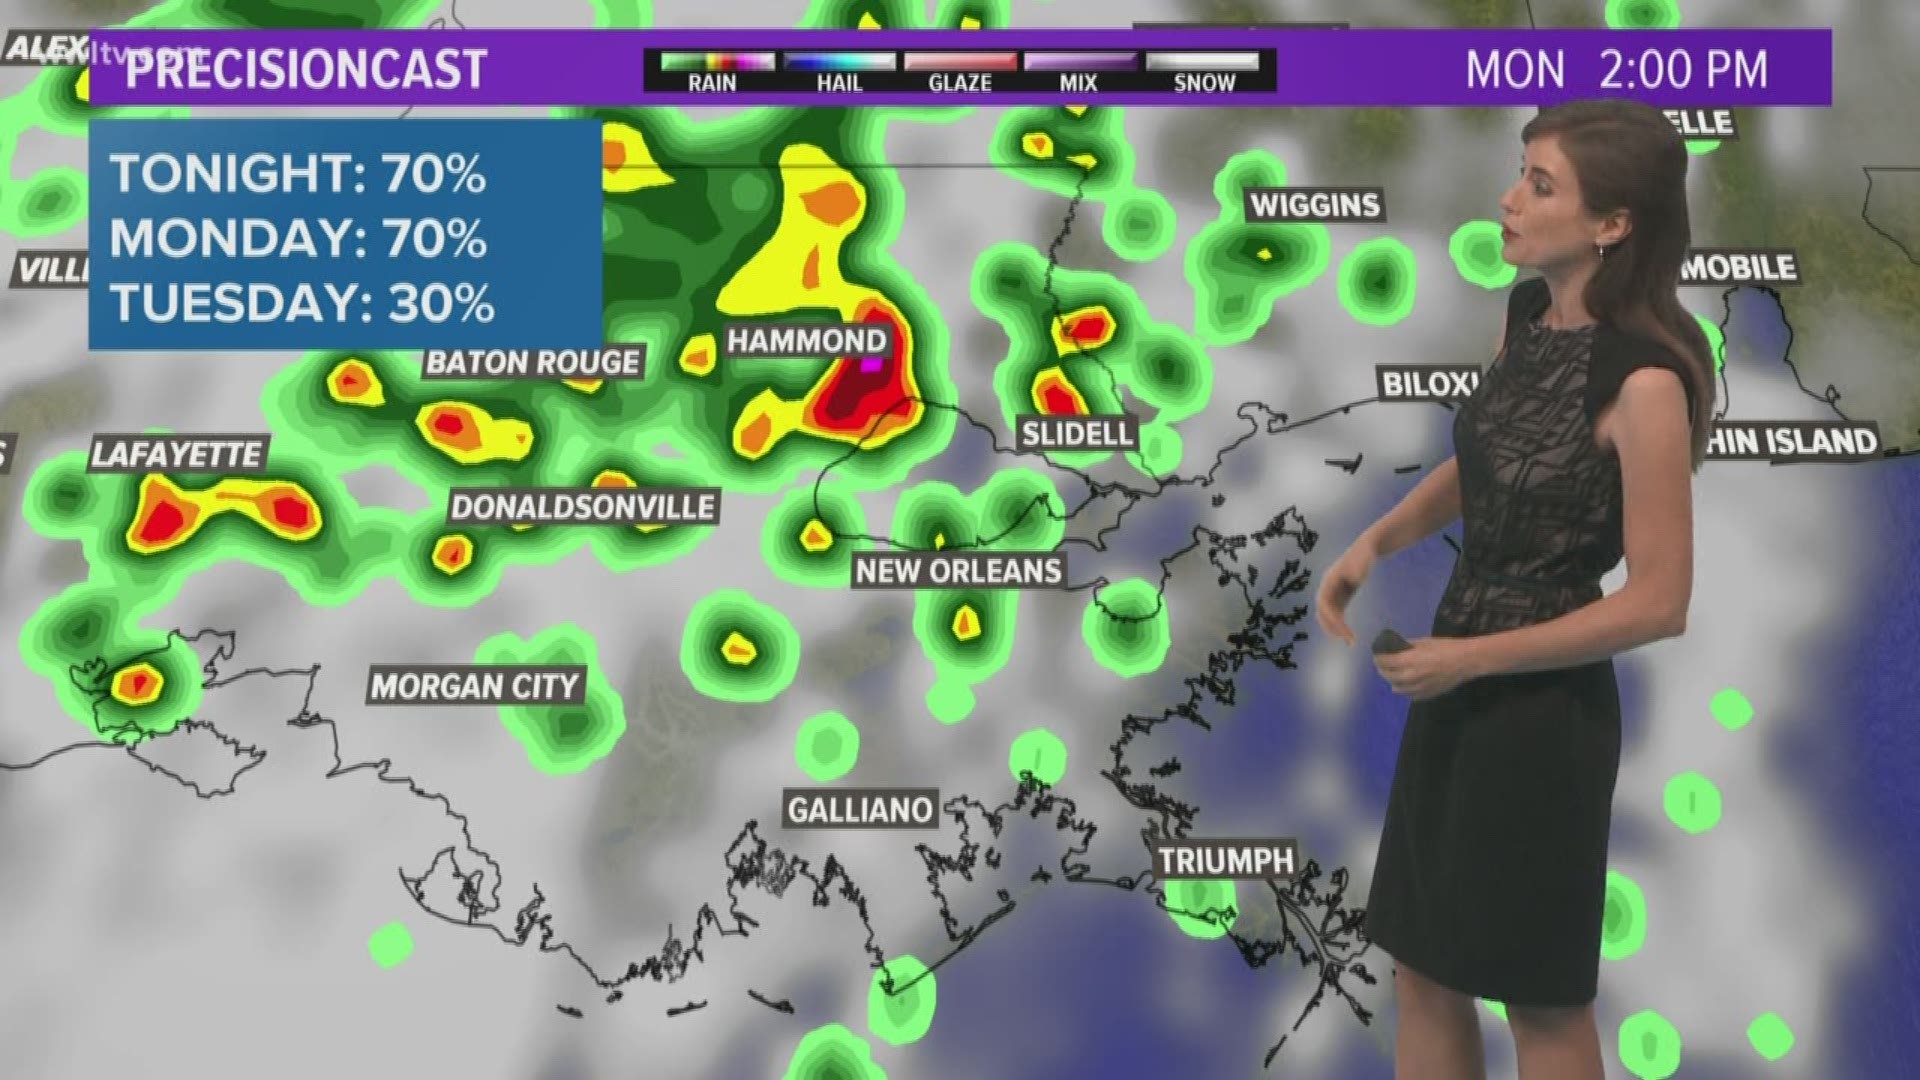 Meteorologist Alexandra Cranford has the forecast at 5:30 p.m. on Sunday, July 14, 2019.